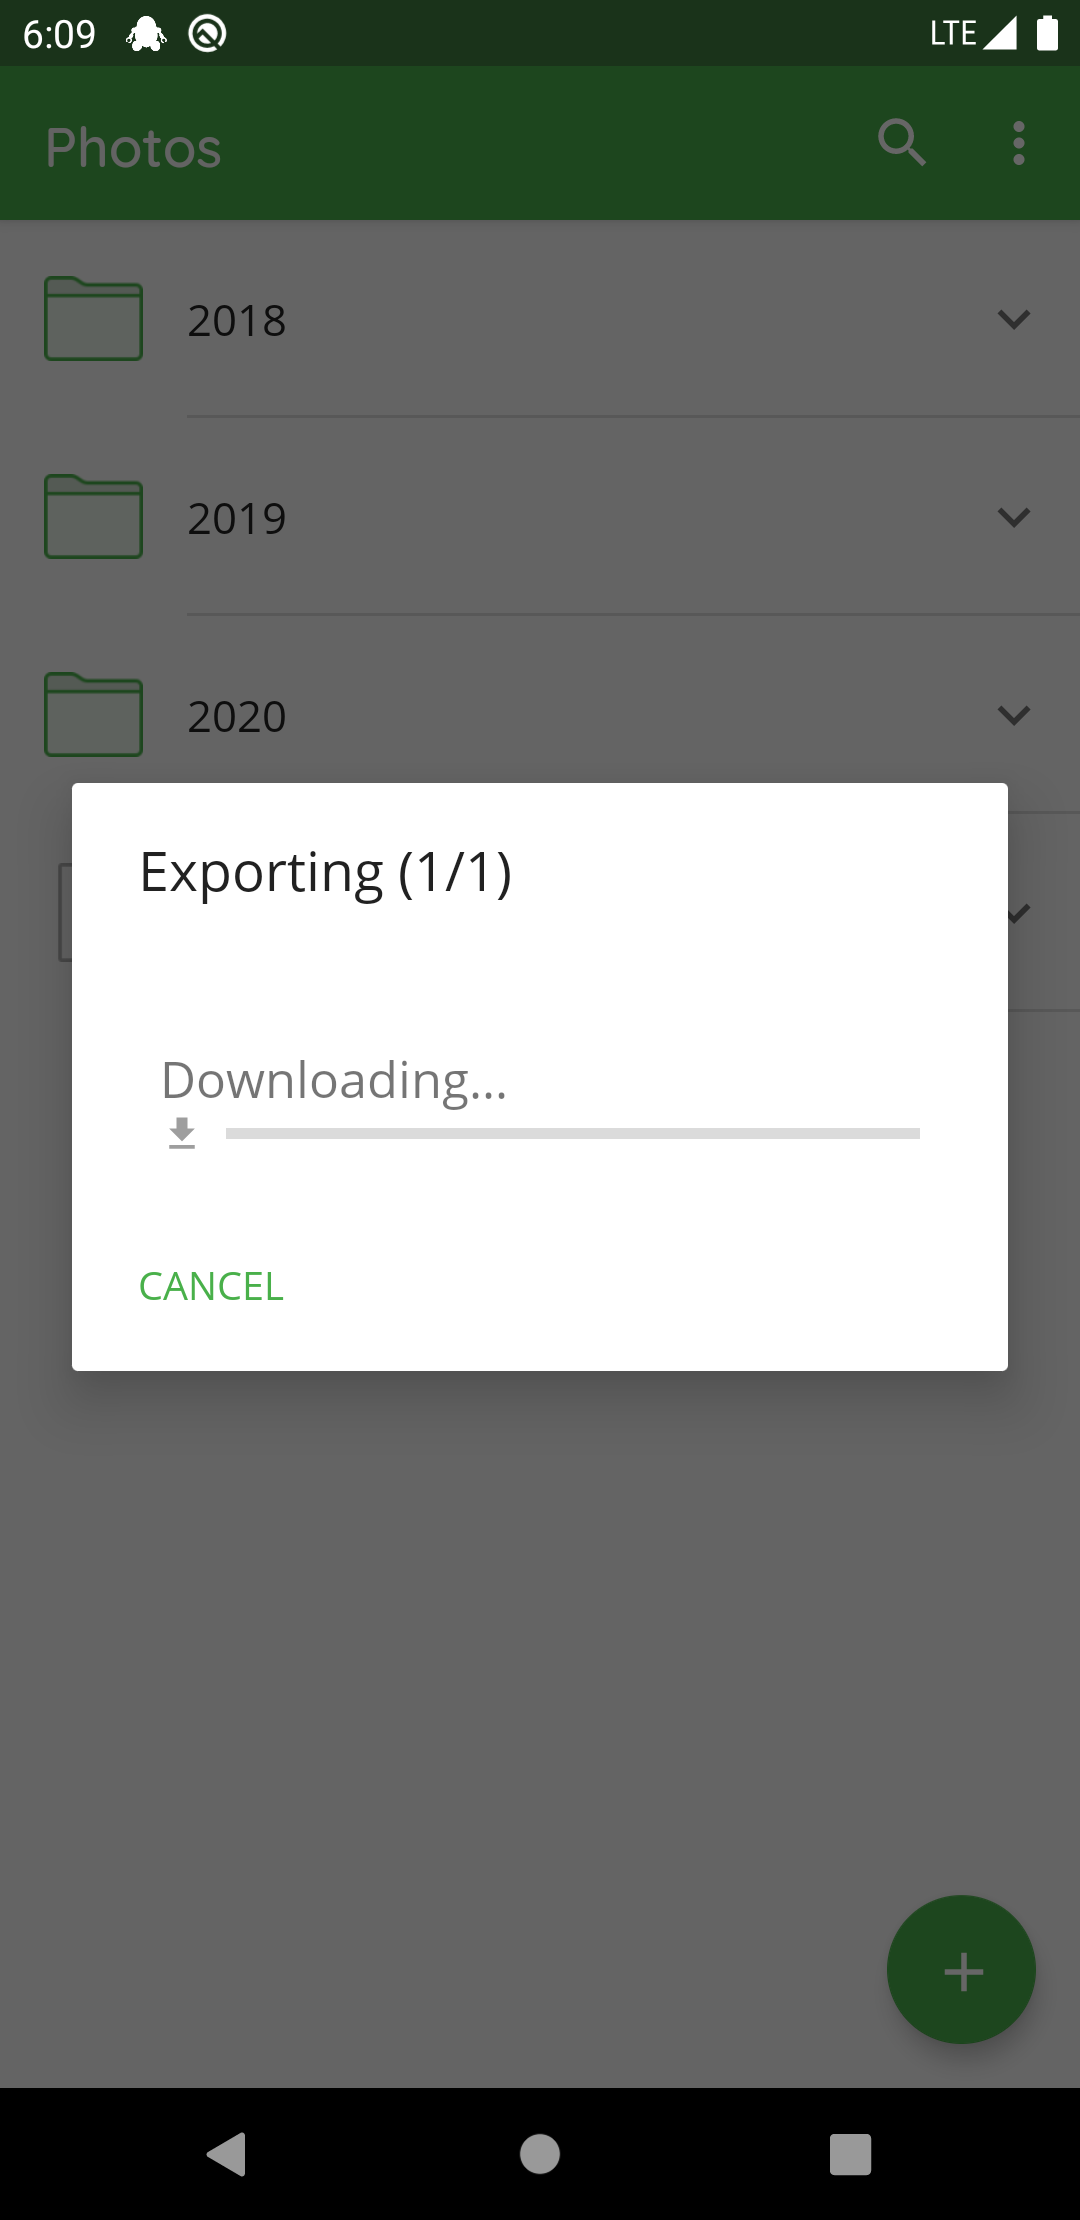 How to export a file or folder with Android